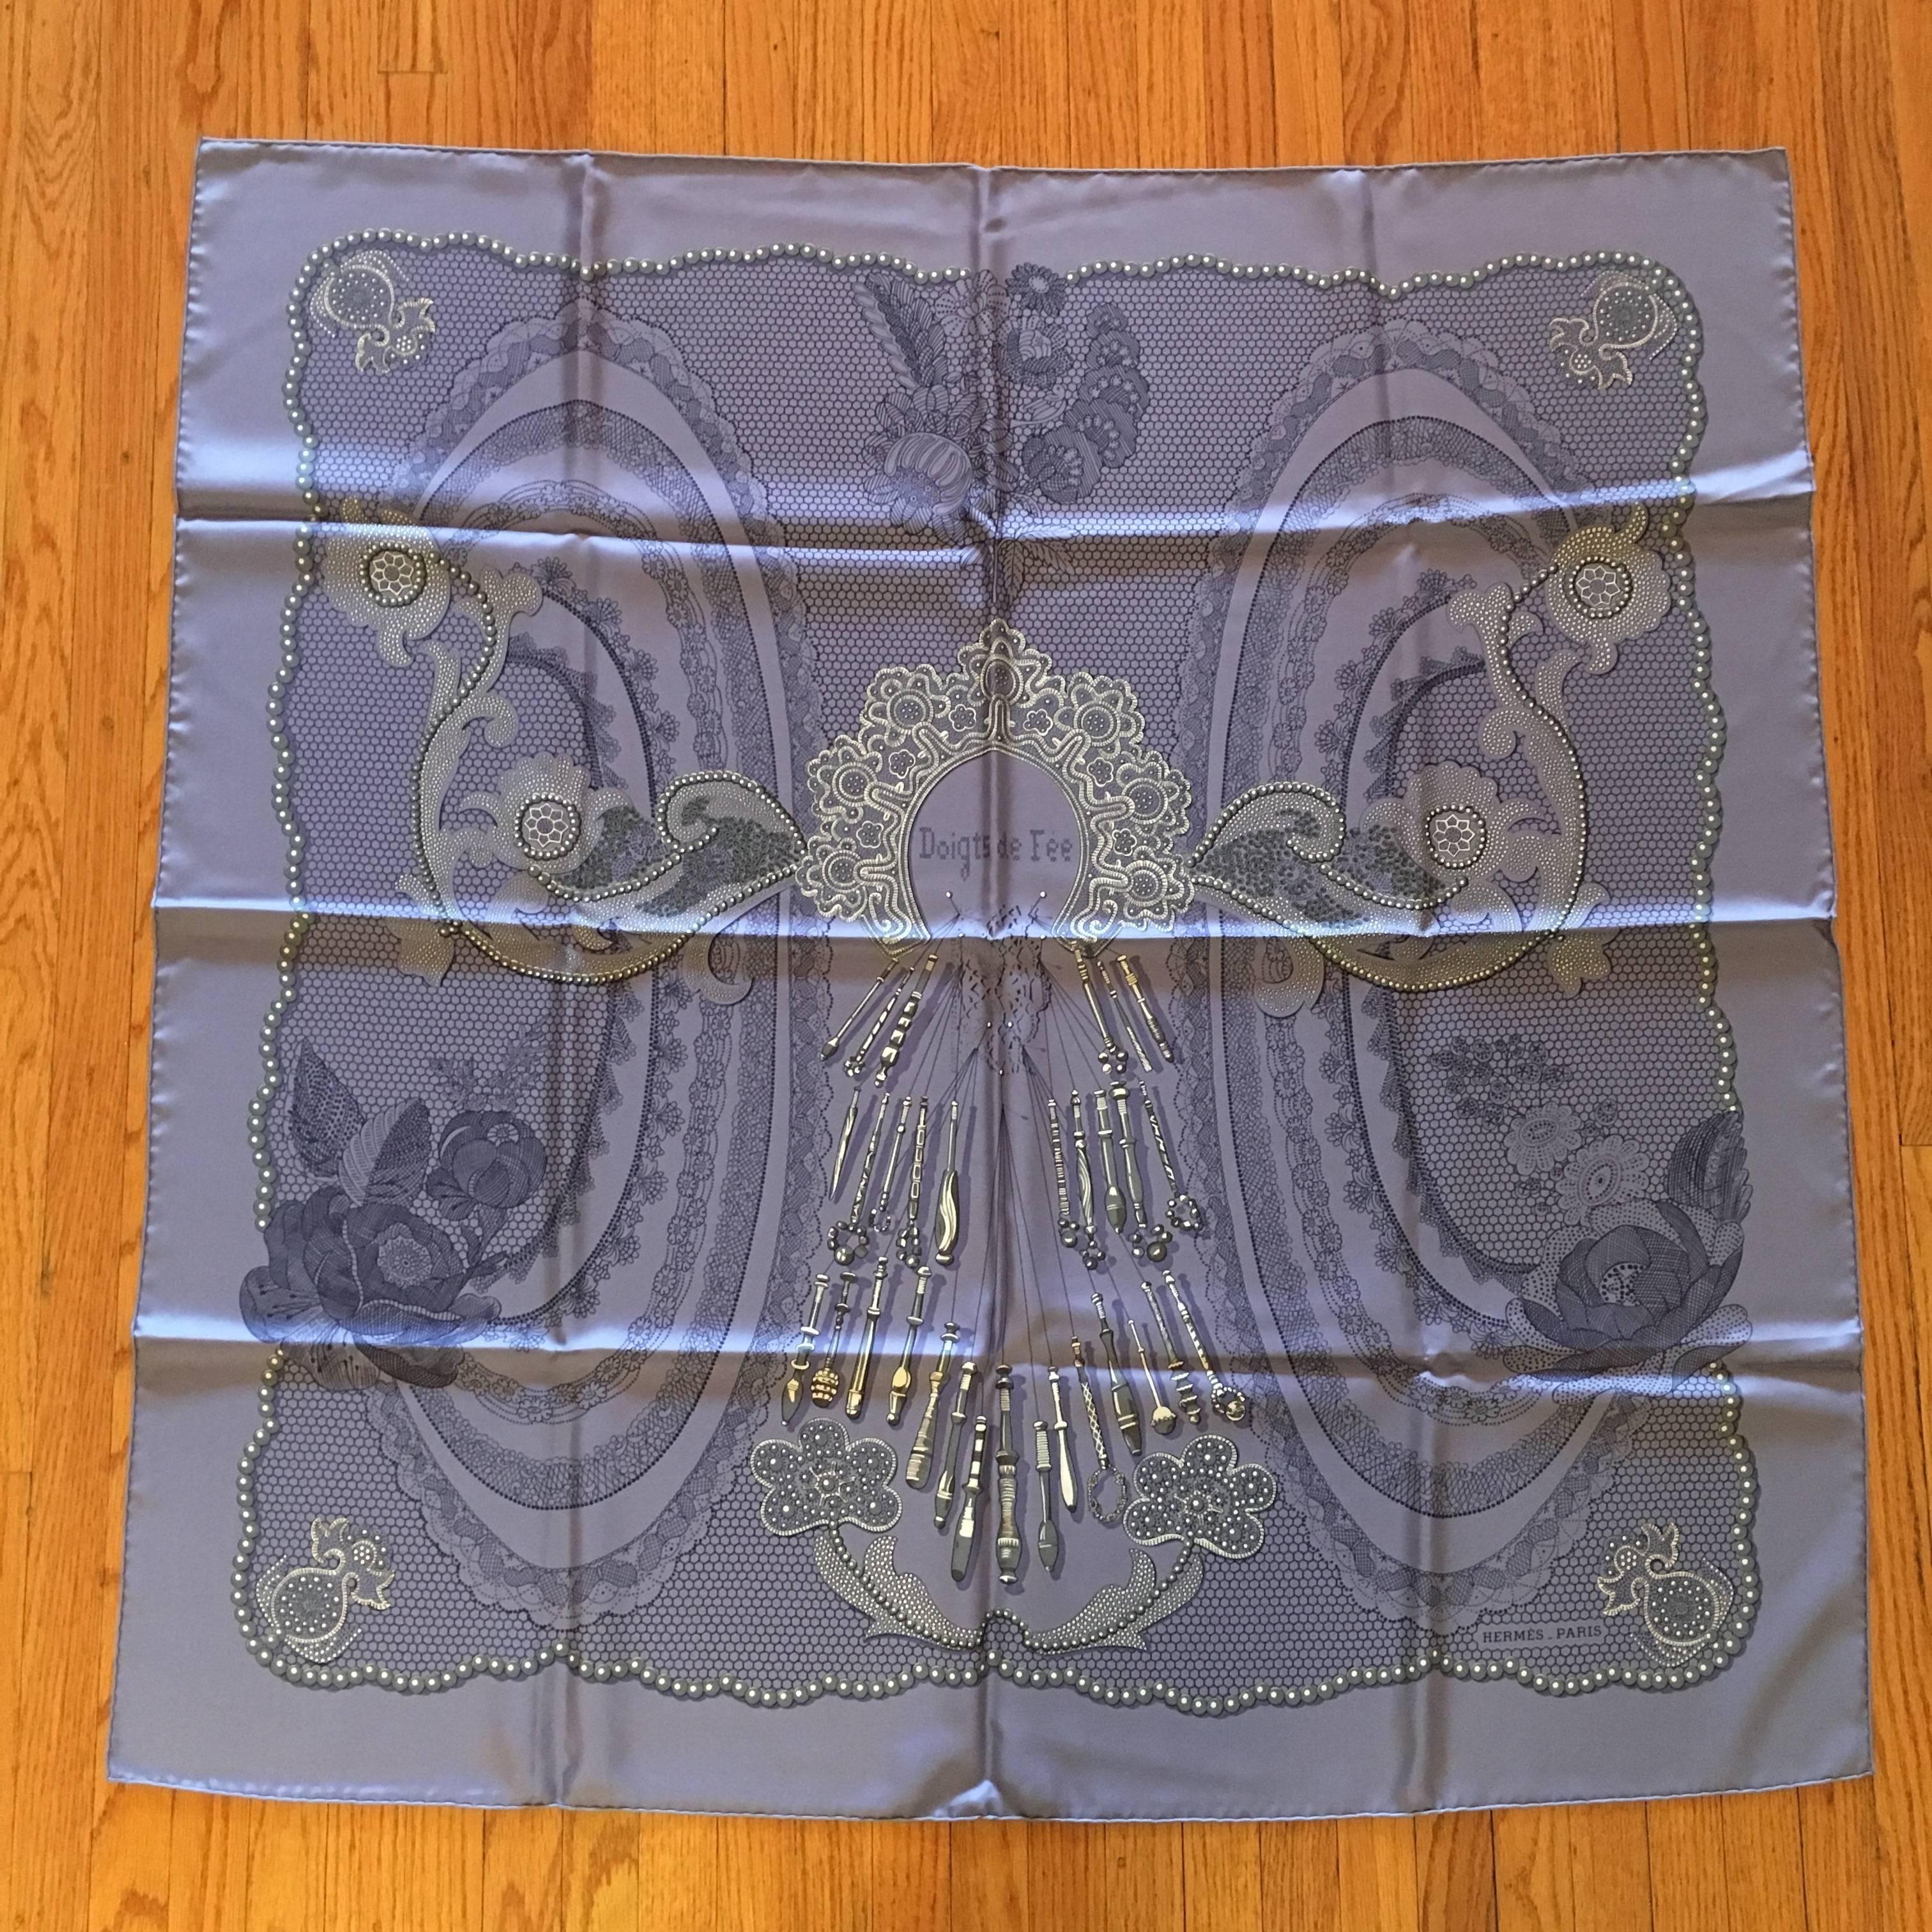 This is a beautiful periwinkle blue Hermes scarf called 'Doigts de Fee' or Fairy Fingers. It pays homage to the art of lace making and was designed in 2000 by Cathy Latham. The design features beautiful lacework as well as lace making tools. It is